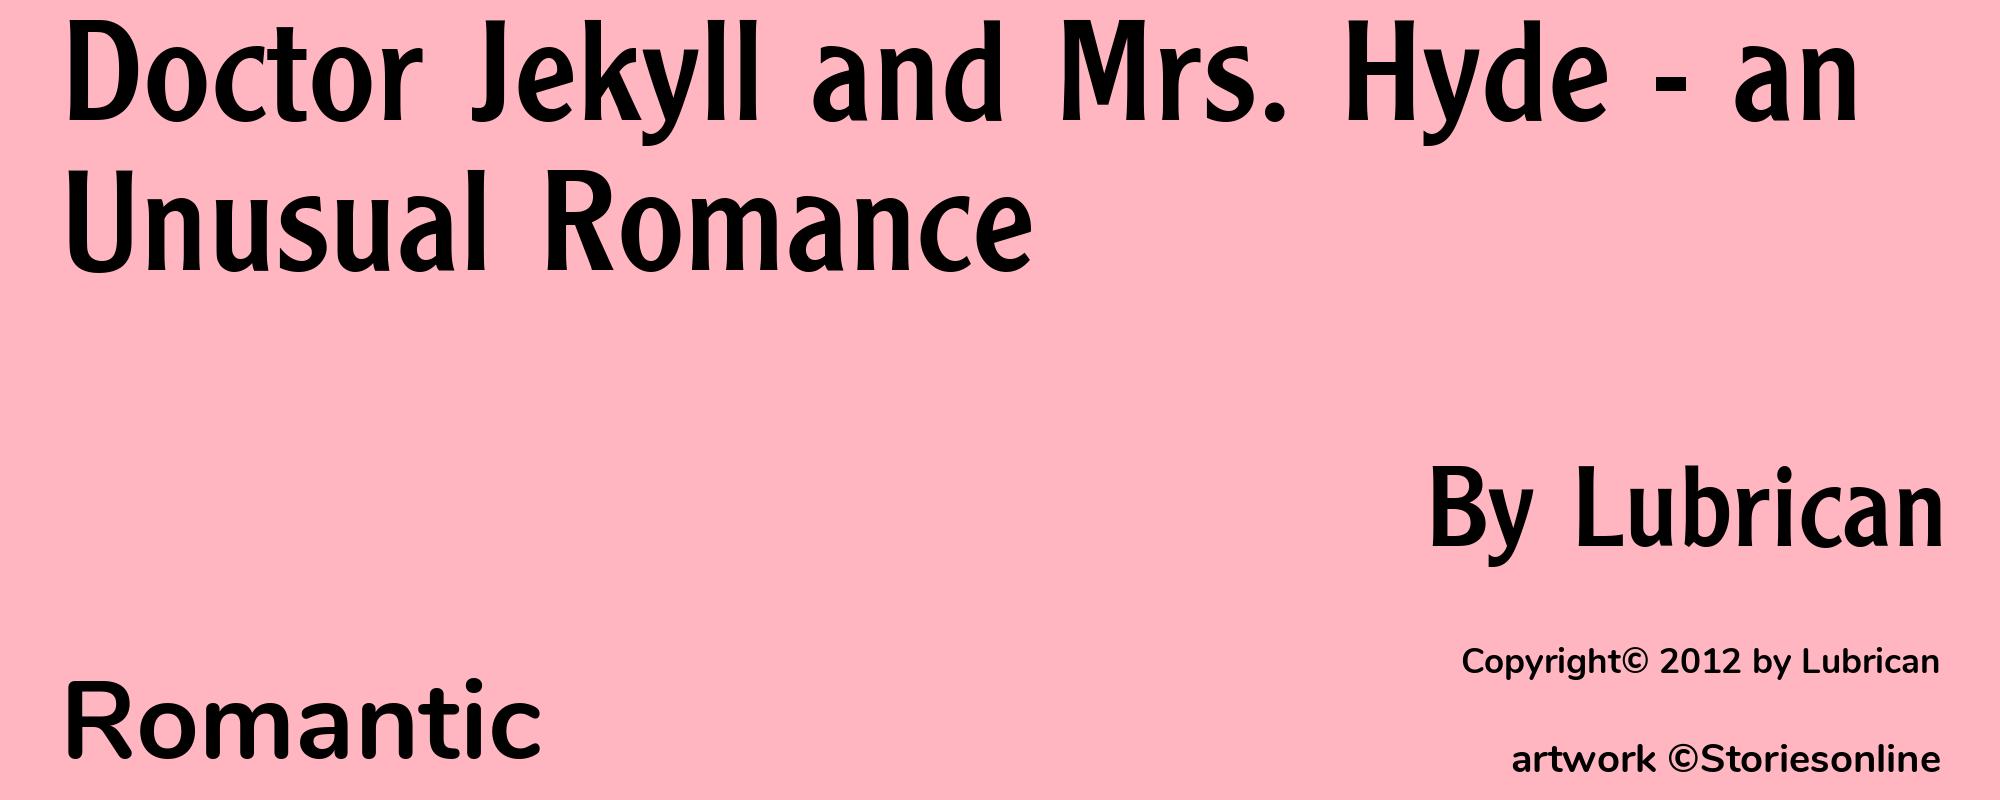 Doctor Jekyll and Mrs. Hyde - an Unusual Romance - Cover